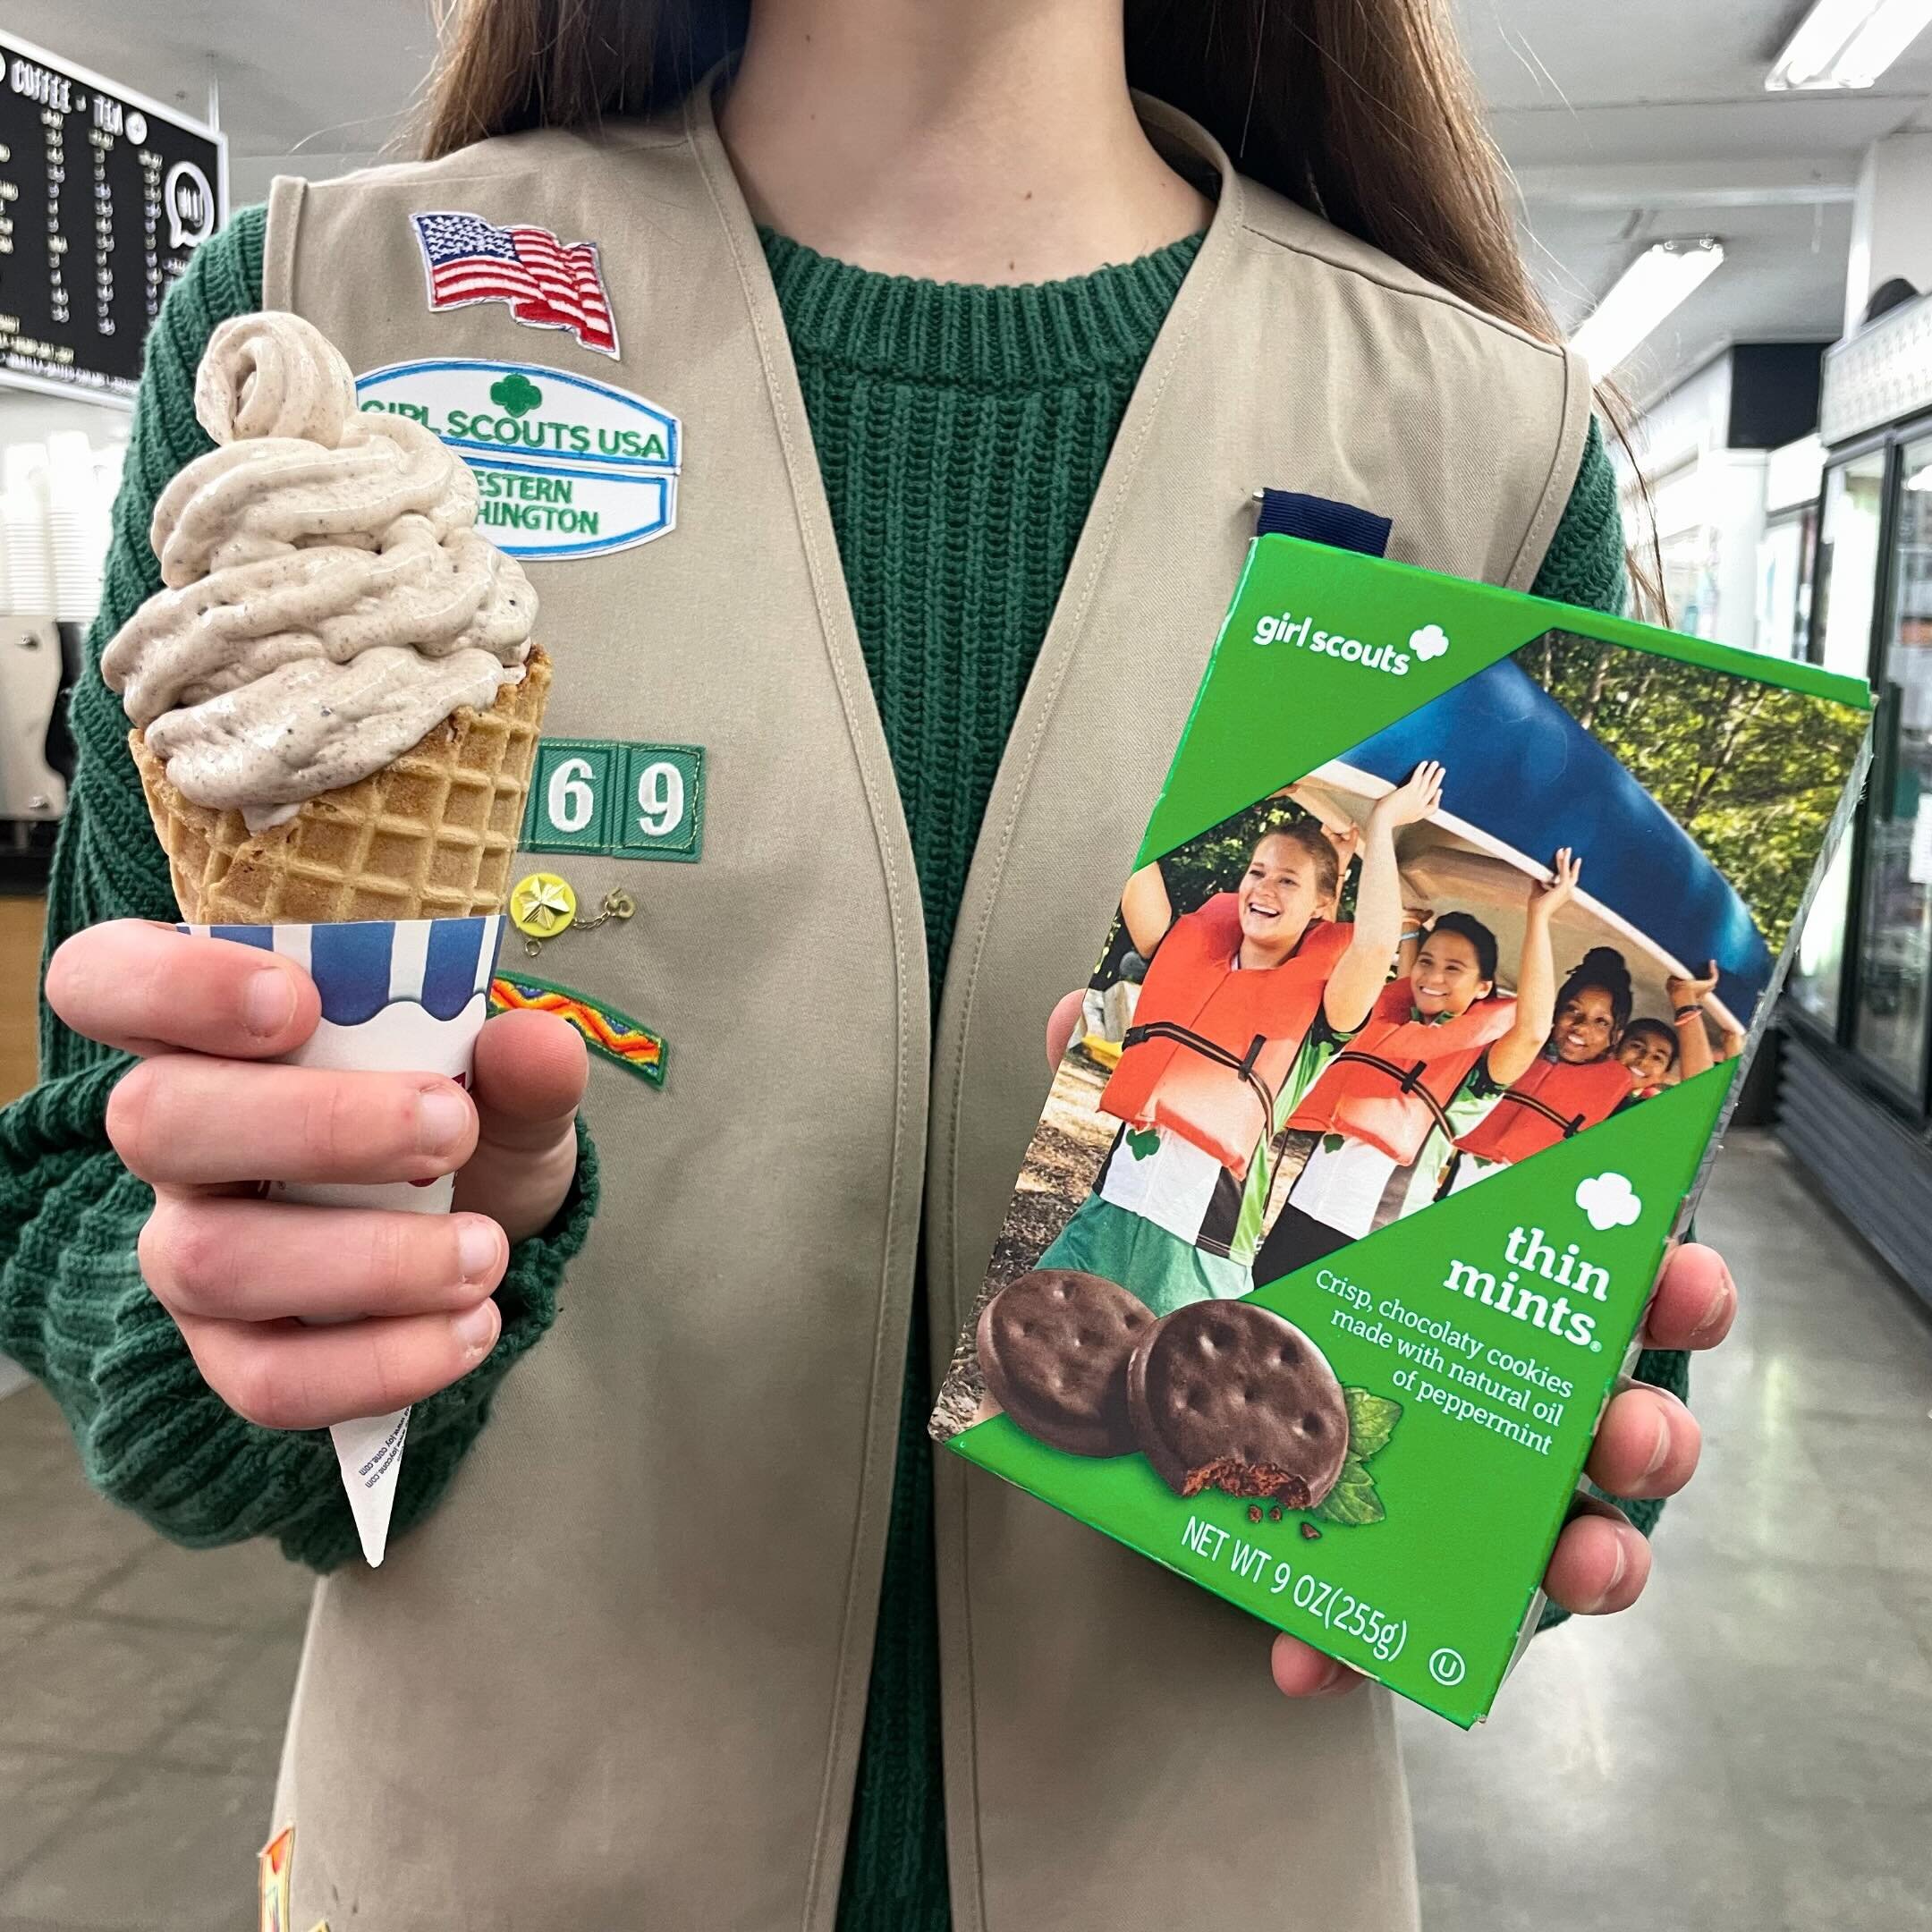 Thin Mint ice cream is now available! This sweet idea was pitched to us by our local Girl Scout troop 💚 And did you know Thin Mints are vegan?! Give this a try in our coconut cream base for a dairy-free treat. Available while supplies last - and we 